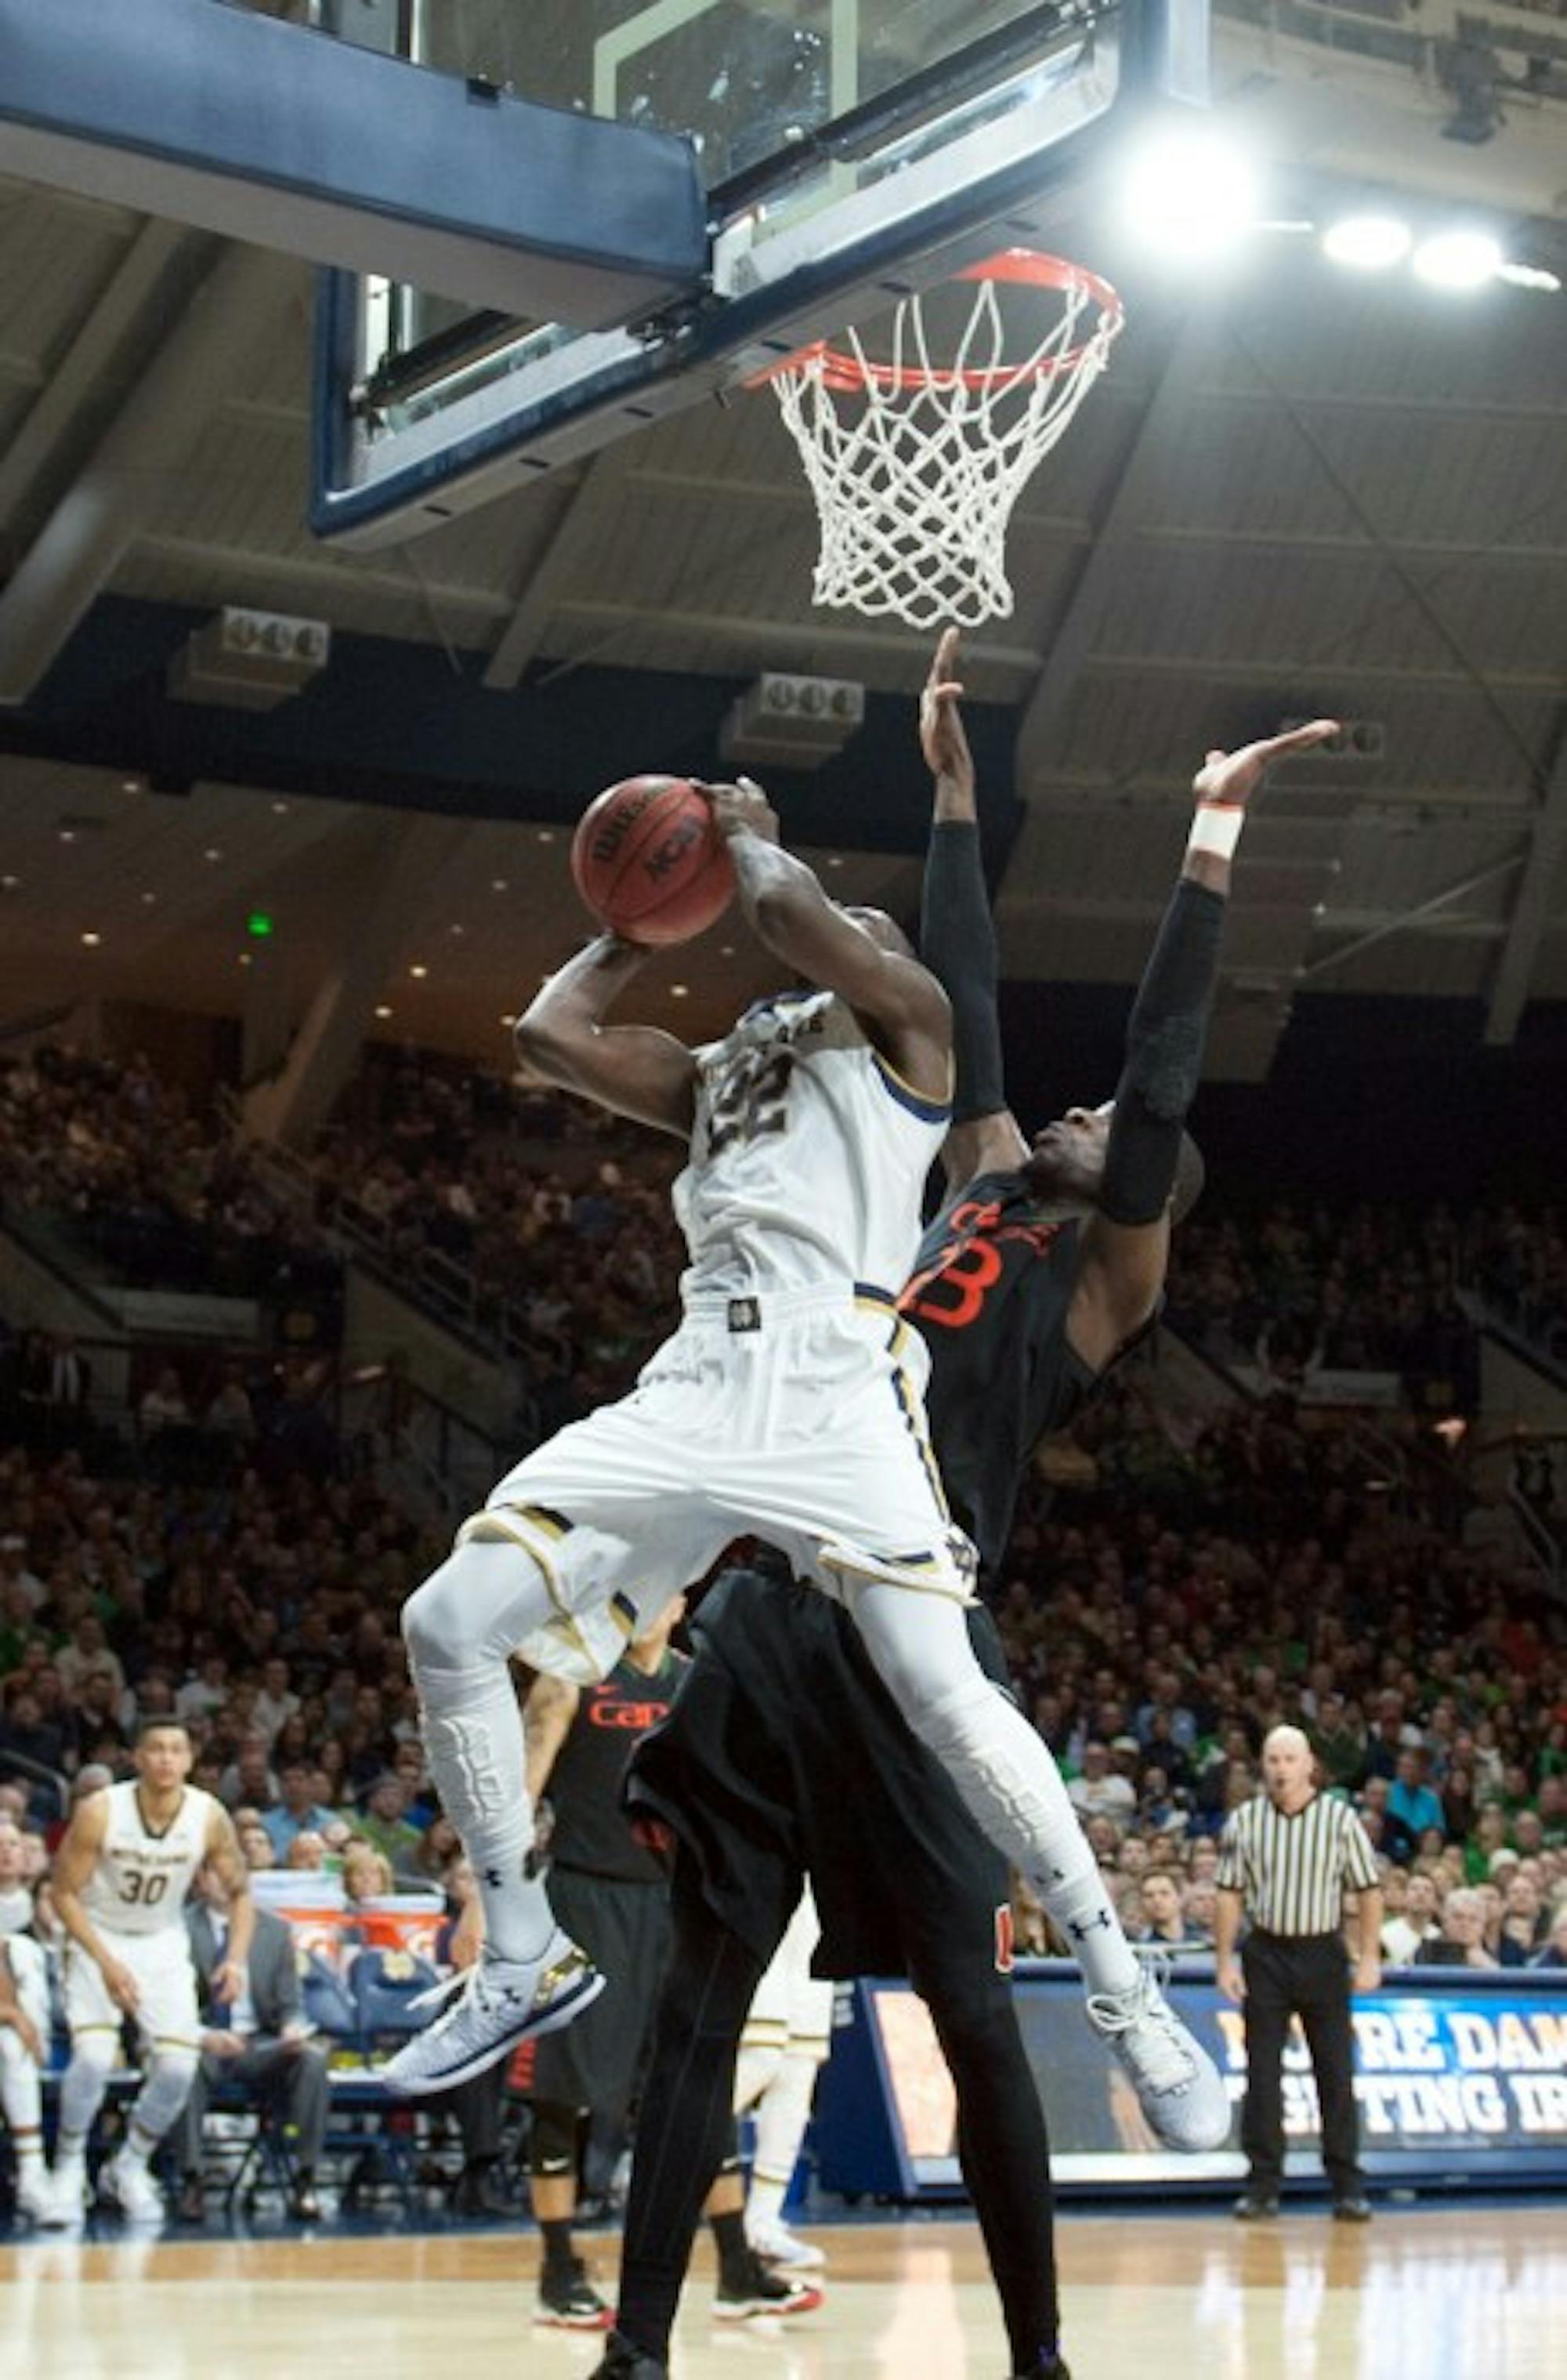 Irish senior guard Jerian Grant scores a bucket against traffic during Notre Dame's 75-70 win over Miami on Saturday at Purcell Pavilion.